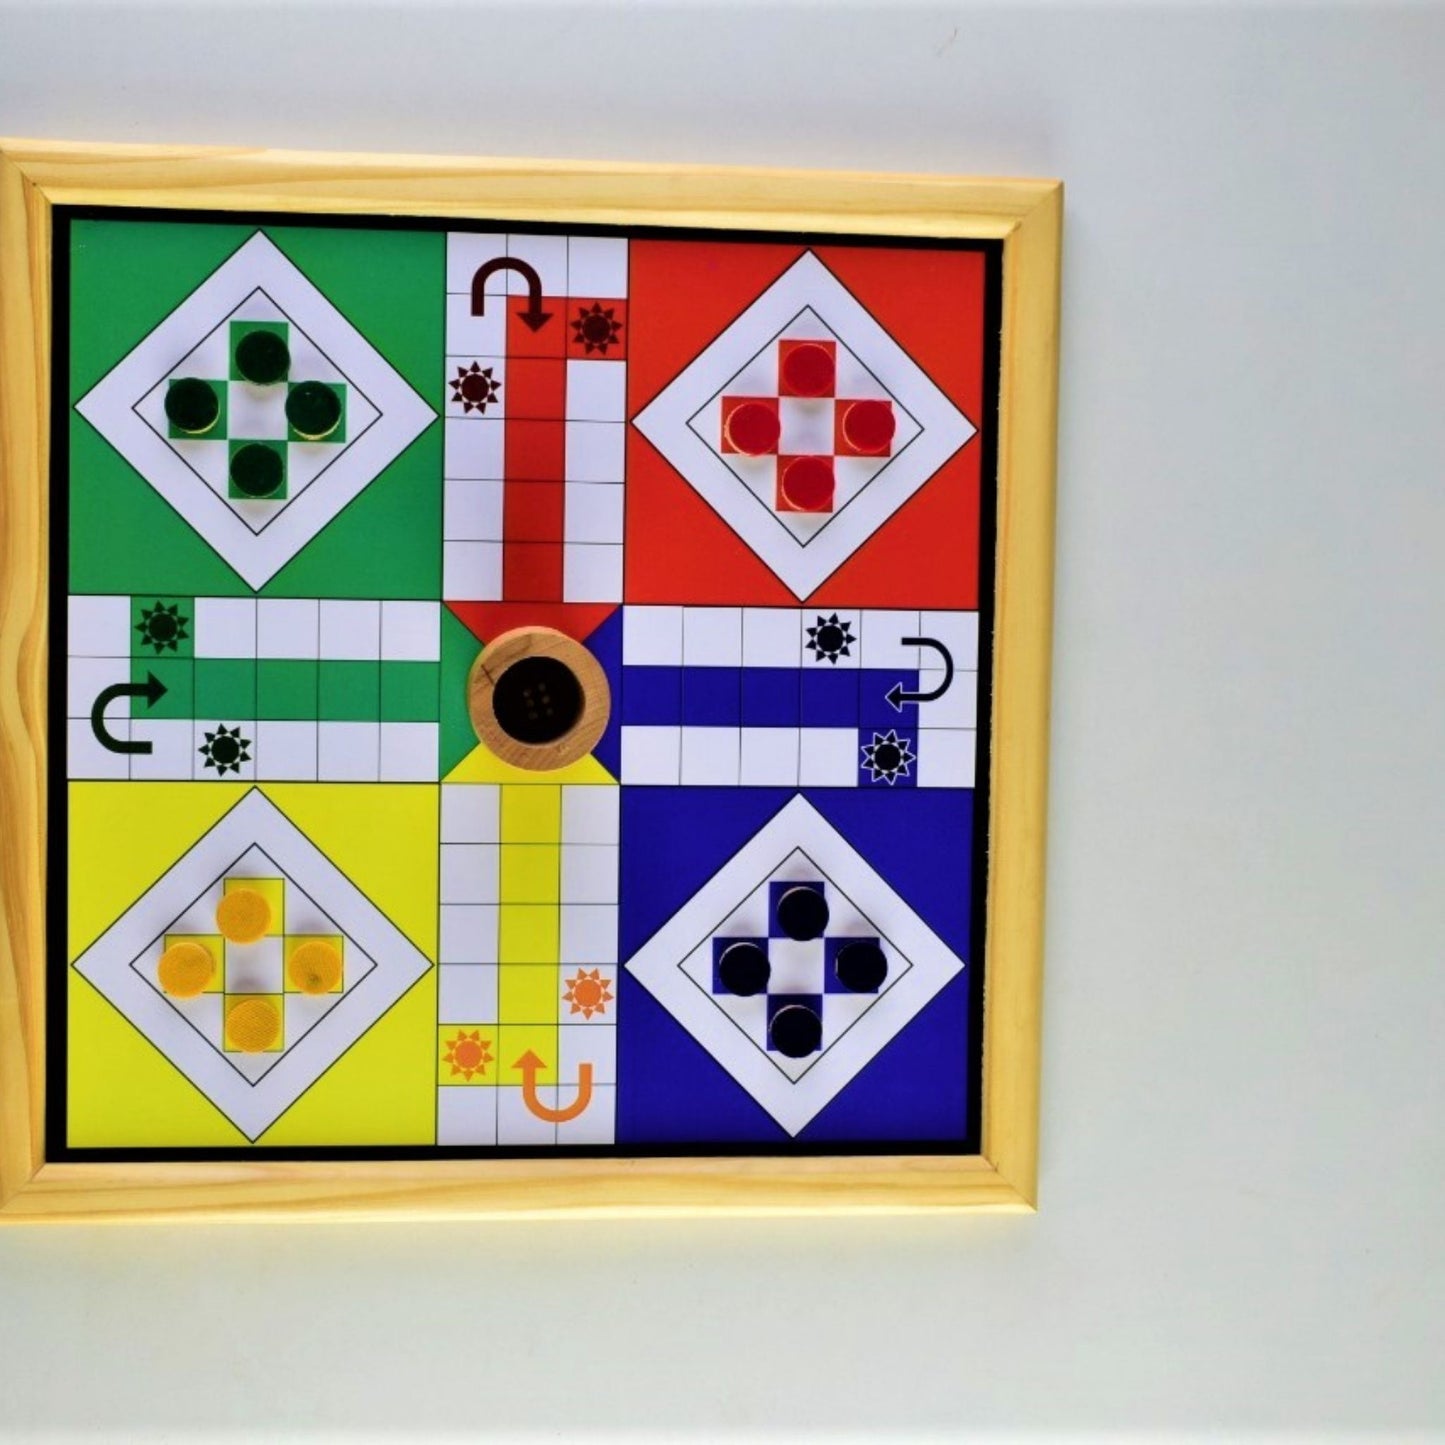 Classic Handmade Wooden 2 in 1 Ludo Magnetic Snakes and Ladders (13 X 13 Inches) Travel Board Game for Kids and Adults